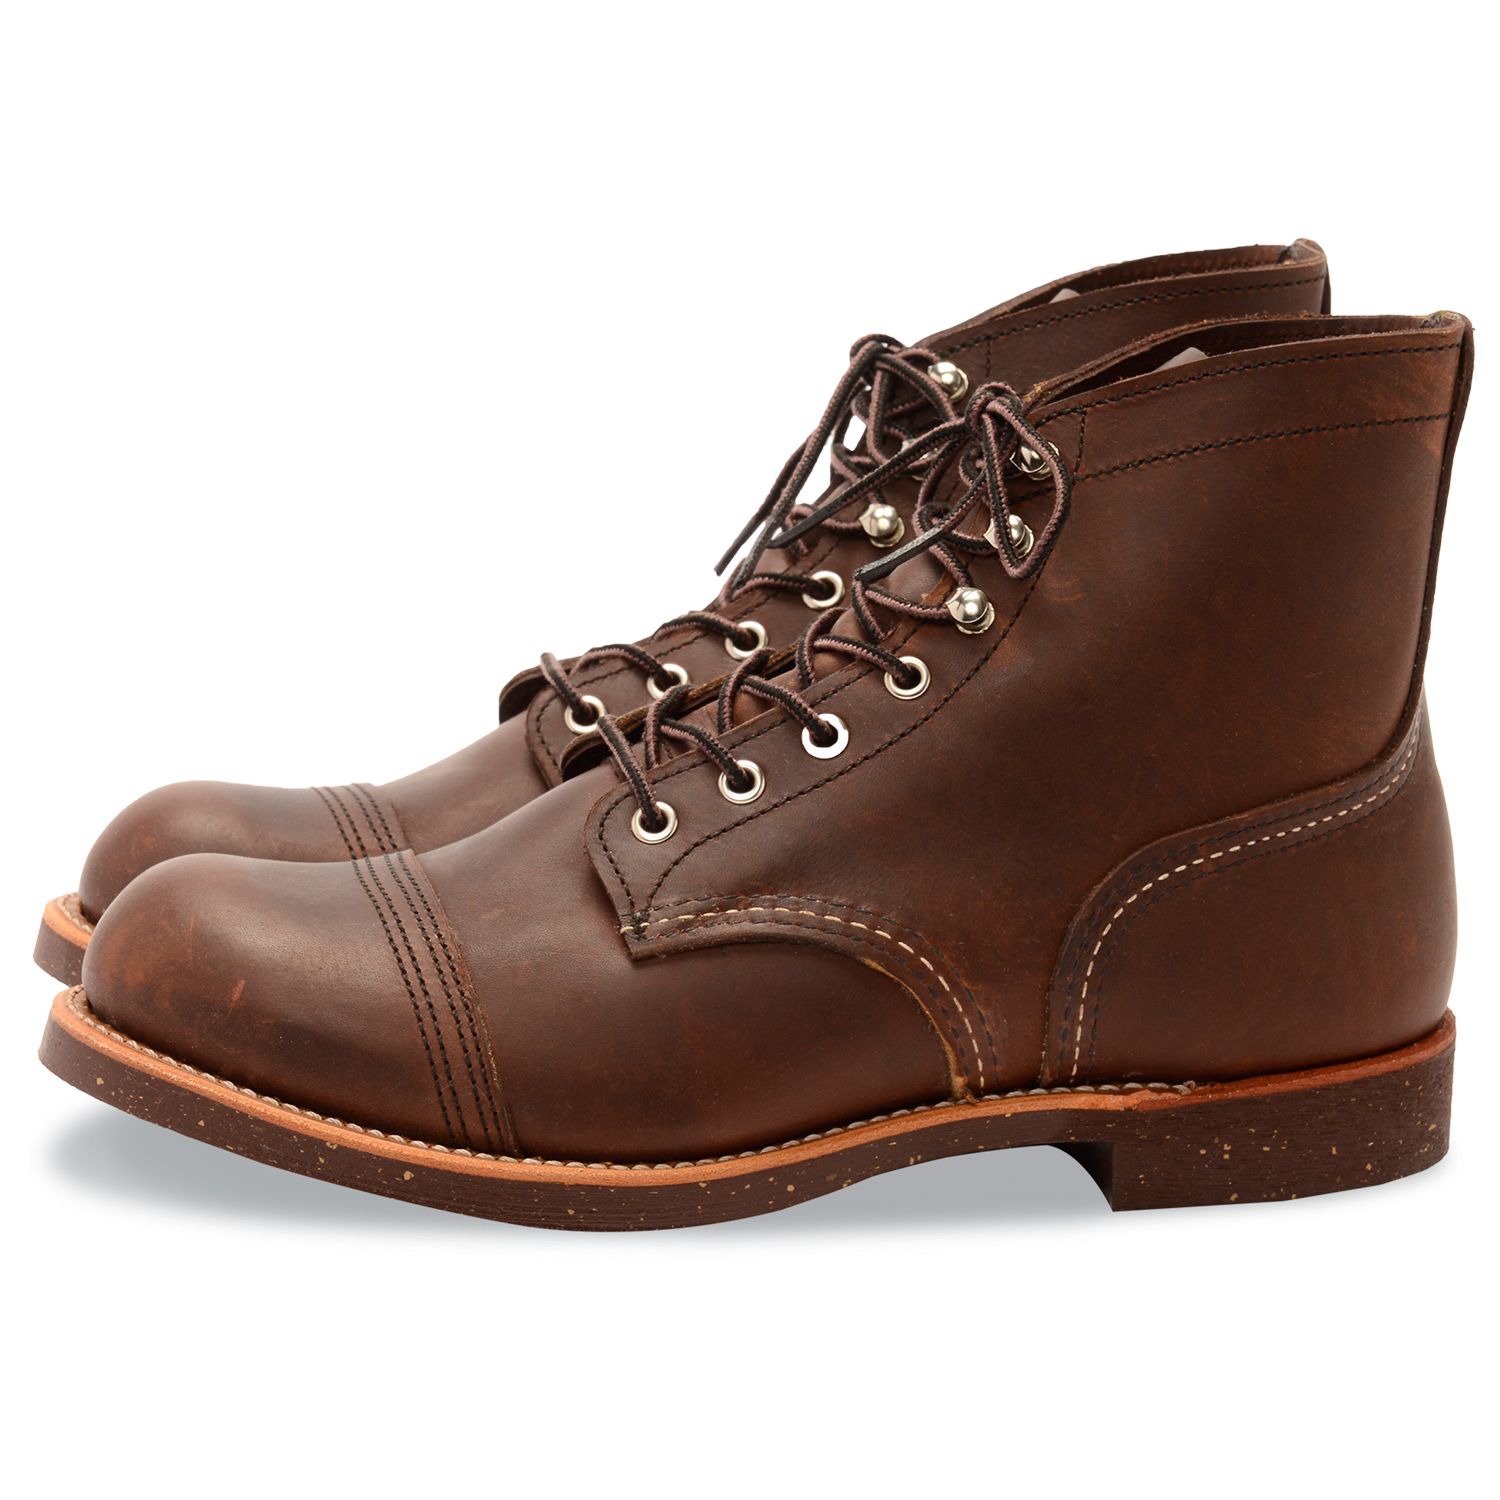 Red Wing 8111 Iron Ranger Boots, Amber Harness